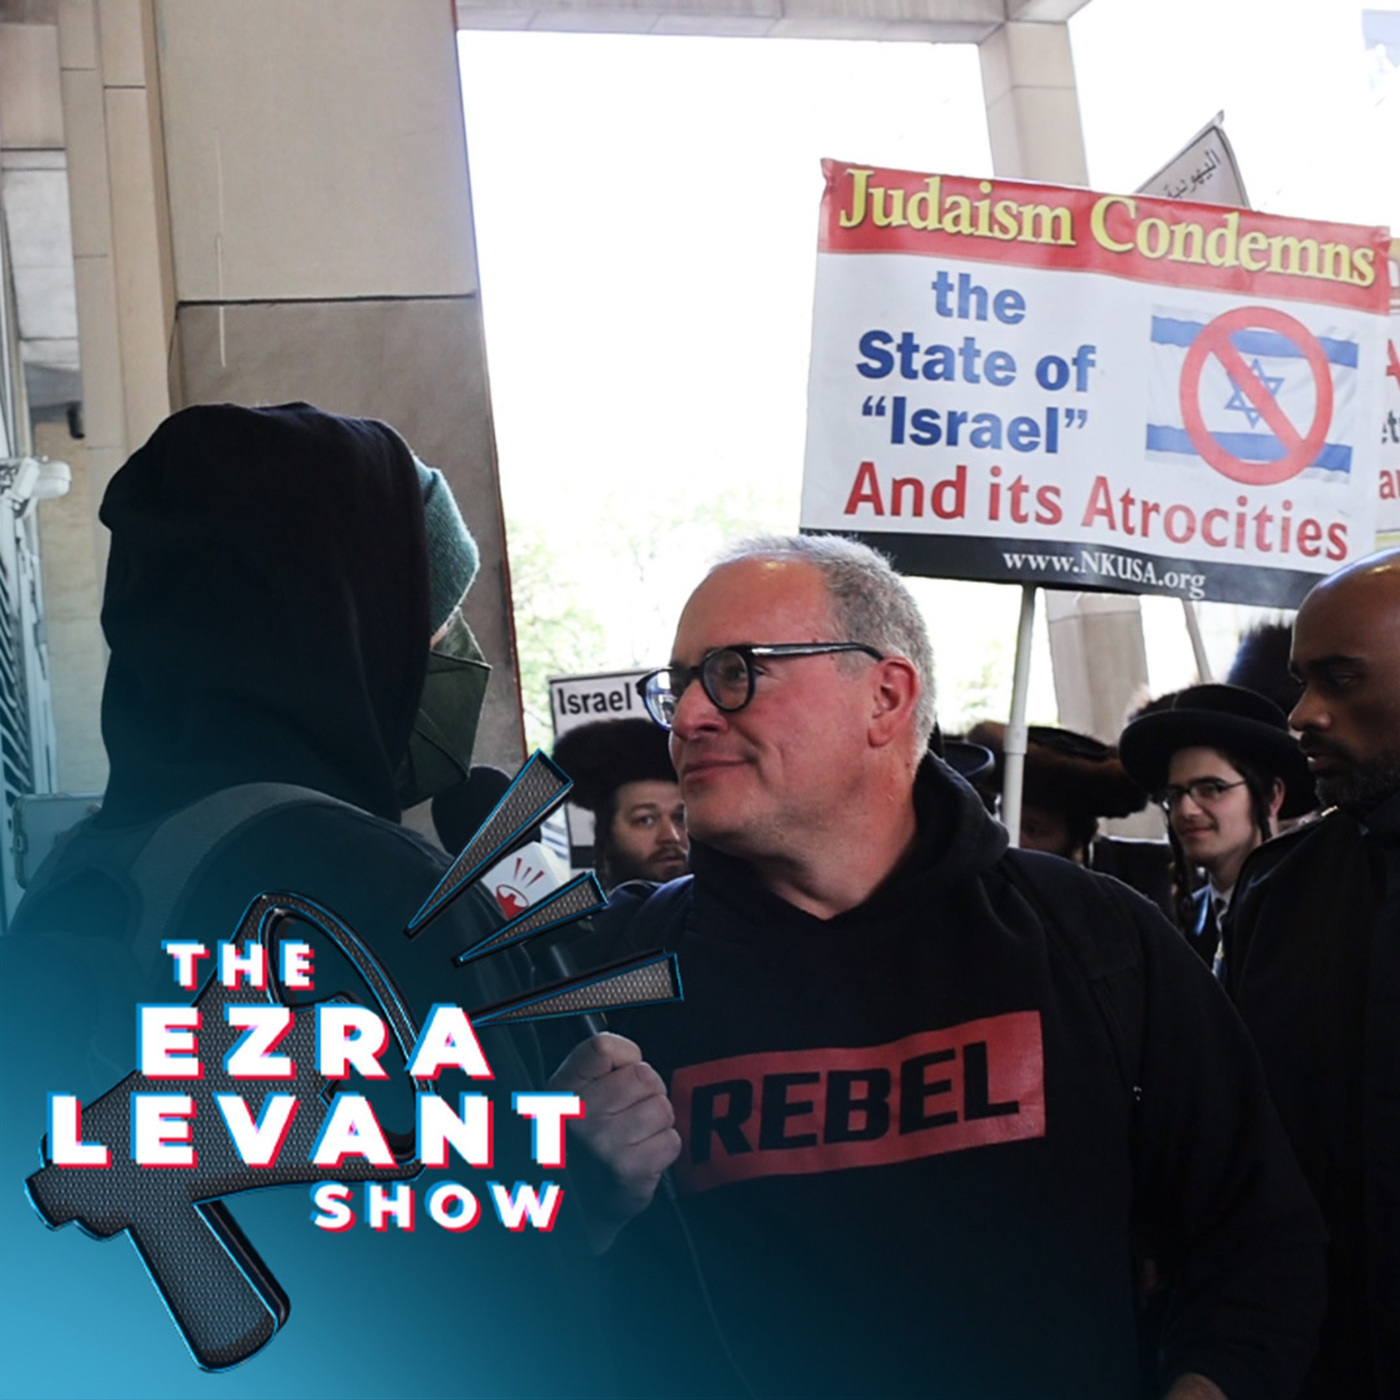 Rebel News Podcast: EZRA LEVANT | On the ground at the pro-Hamas takeover of the New York Fashion Institute